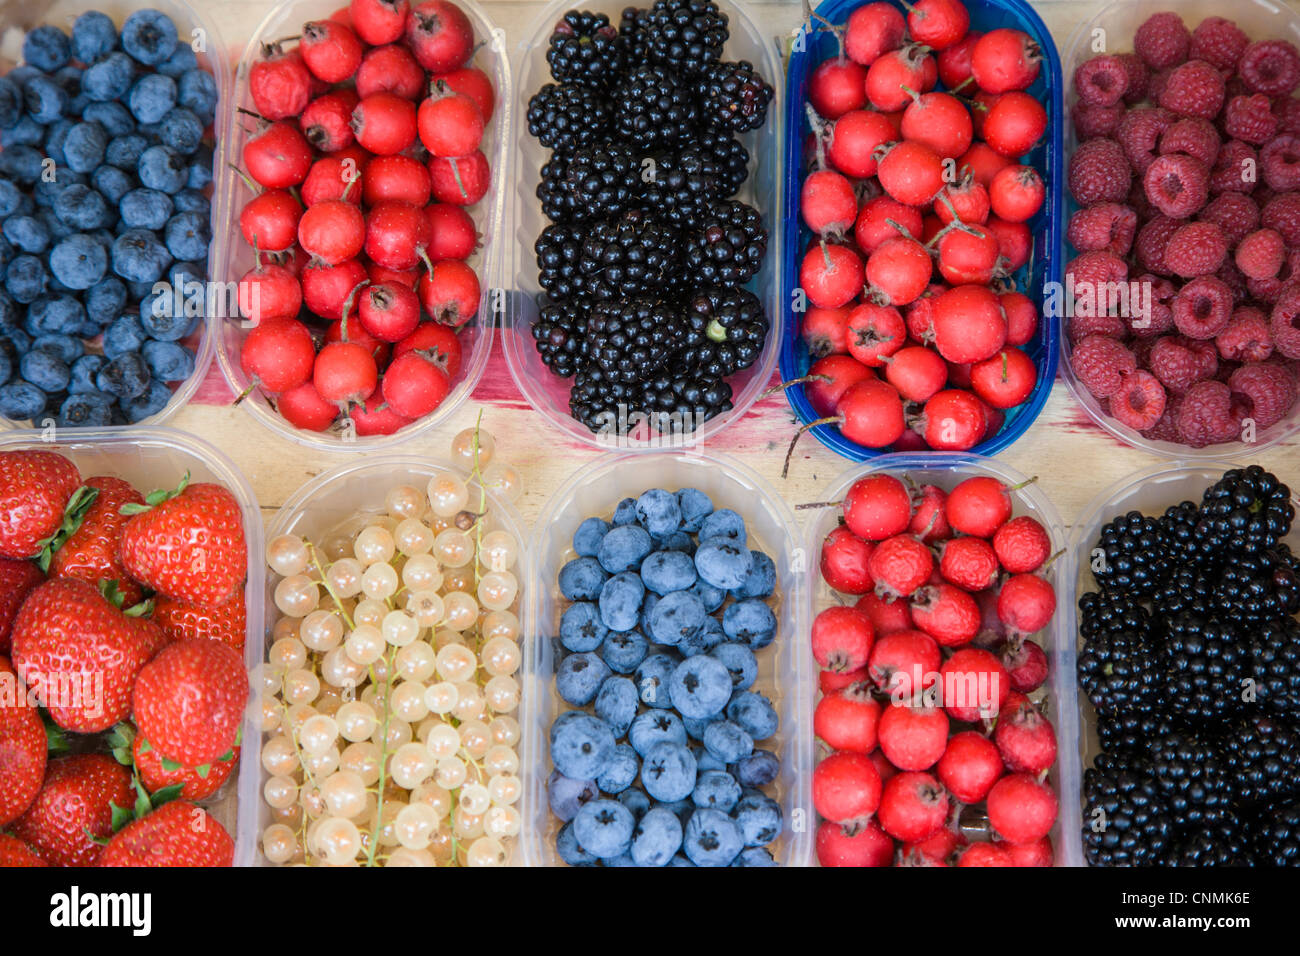 Punnets of fruit including blueberry, strawberry and blackberry Stock Photo